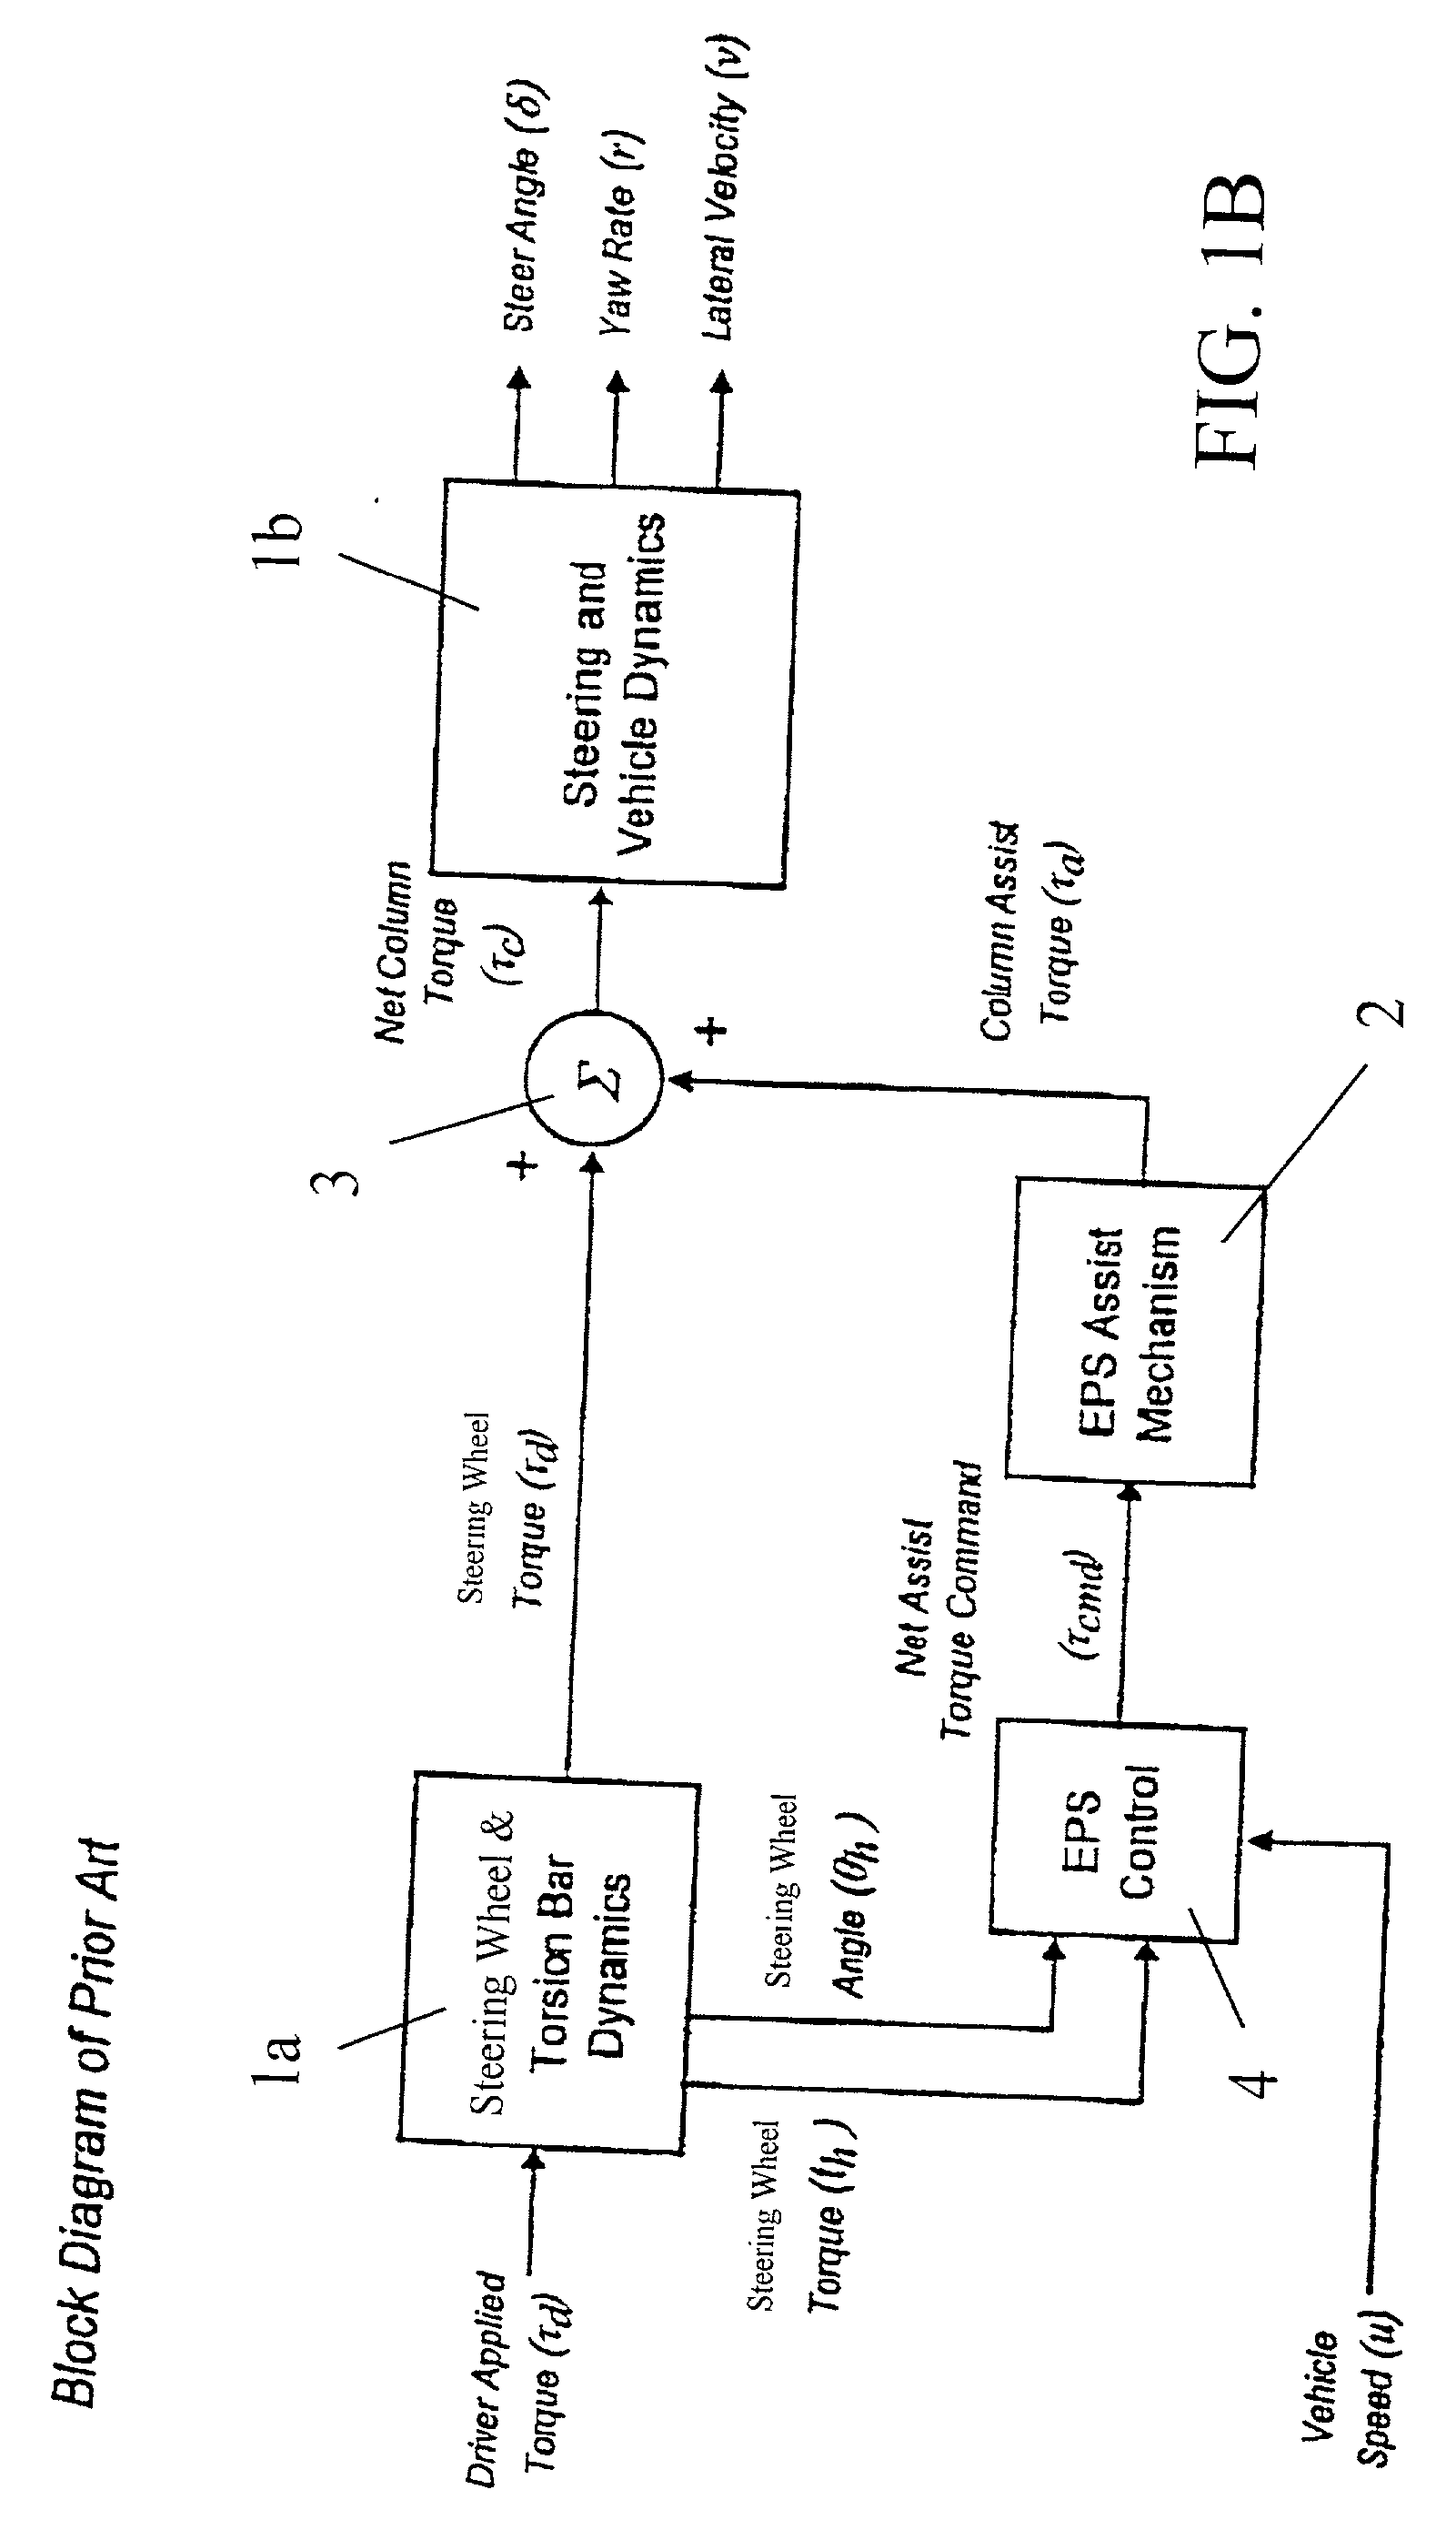 Method and system for improving motor vehicle stability incorporating an electric power steering system